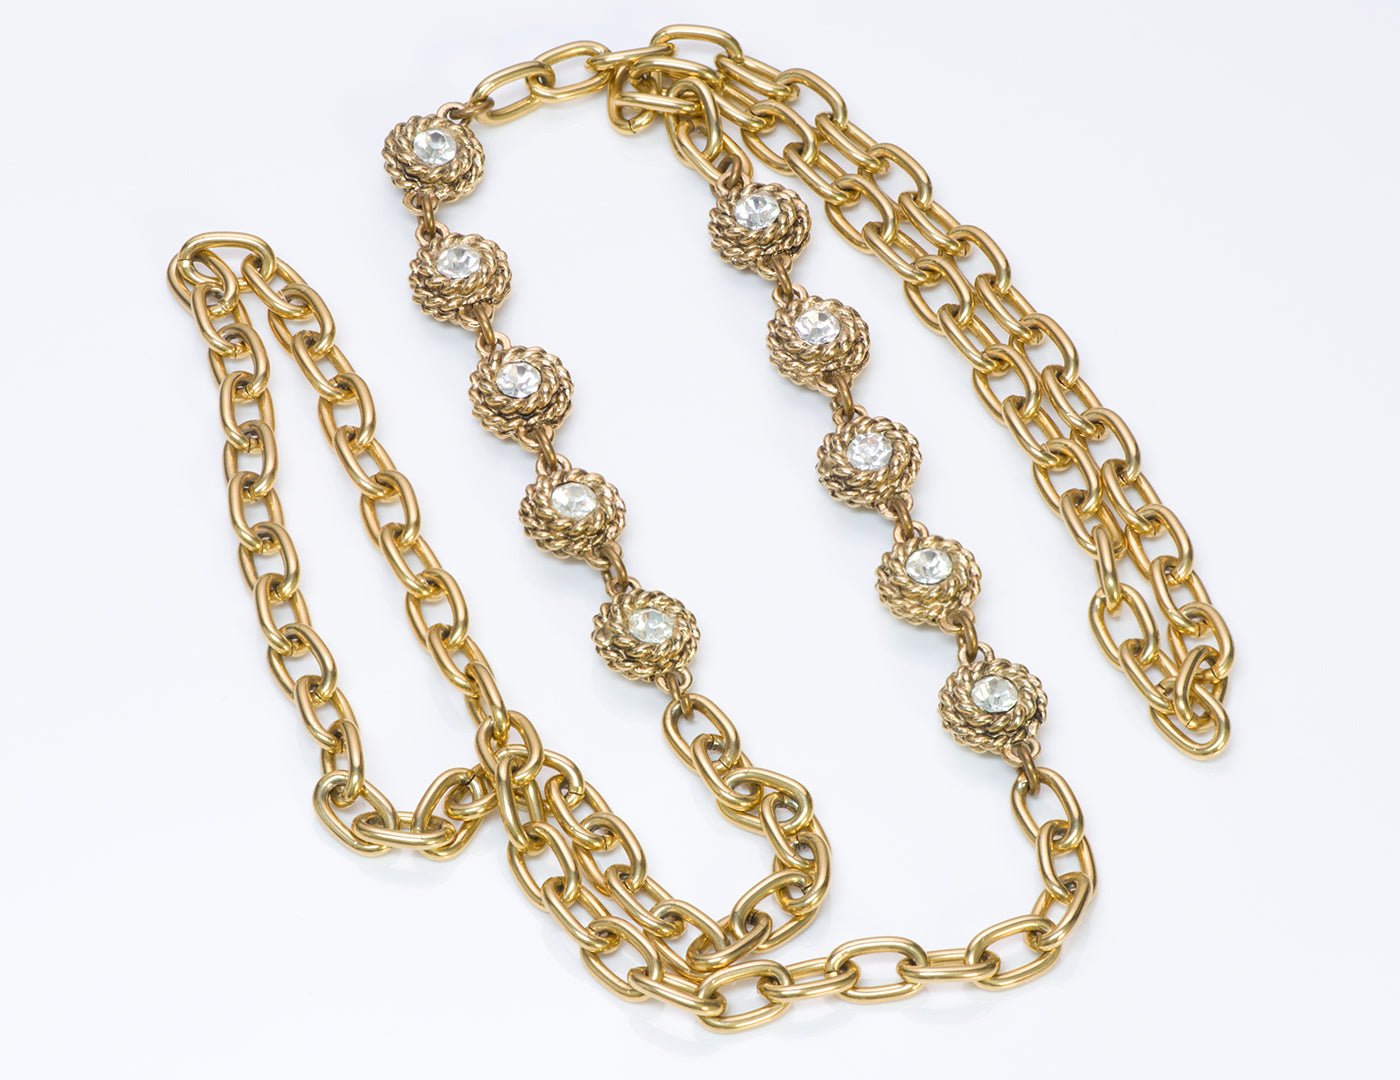 Chanel 1980’s Gold Tone Chain Camellia Crystal Necklace - DSF Antique Jewelry